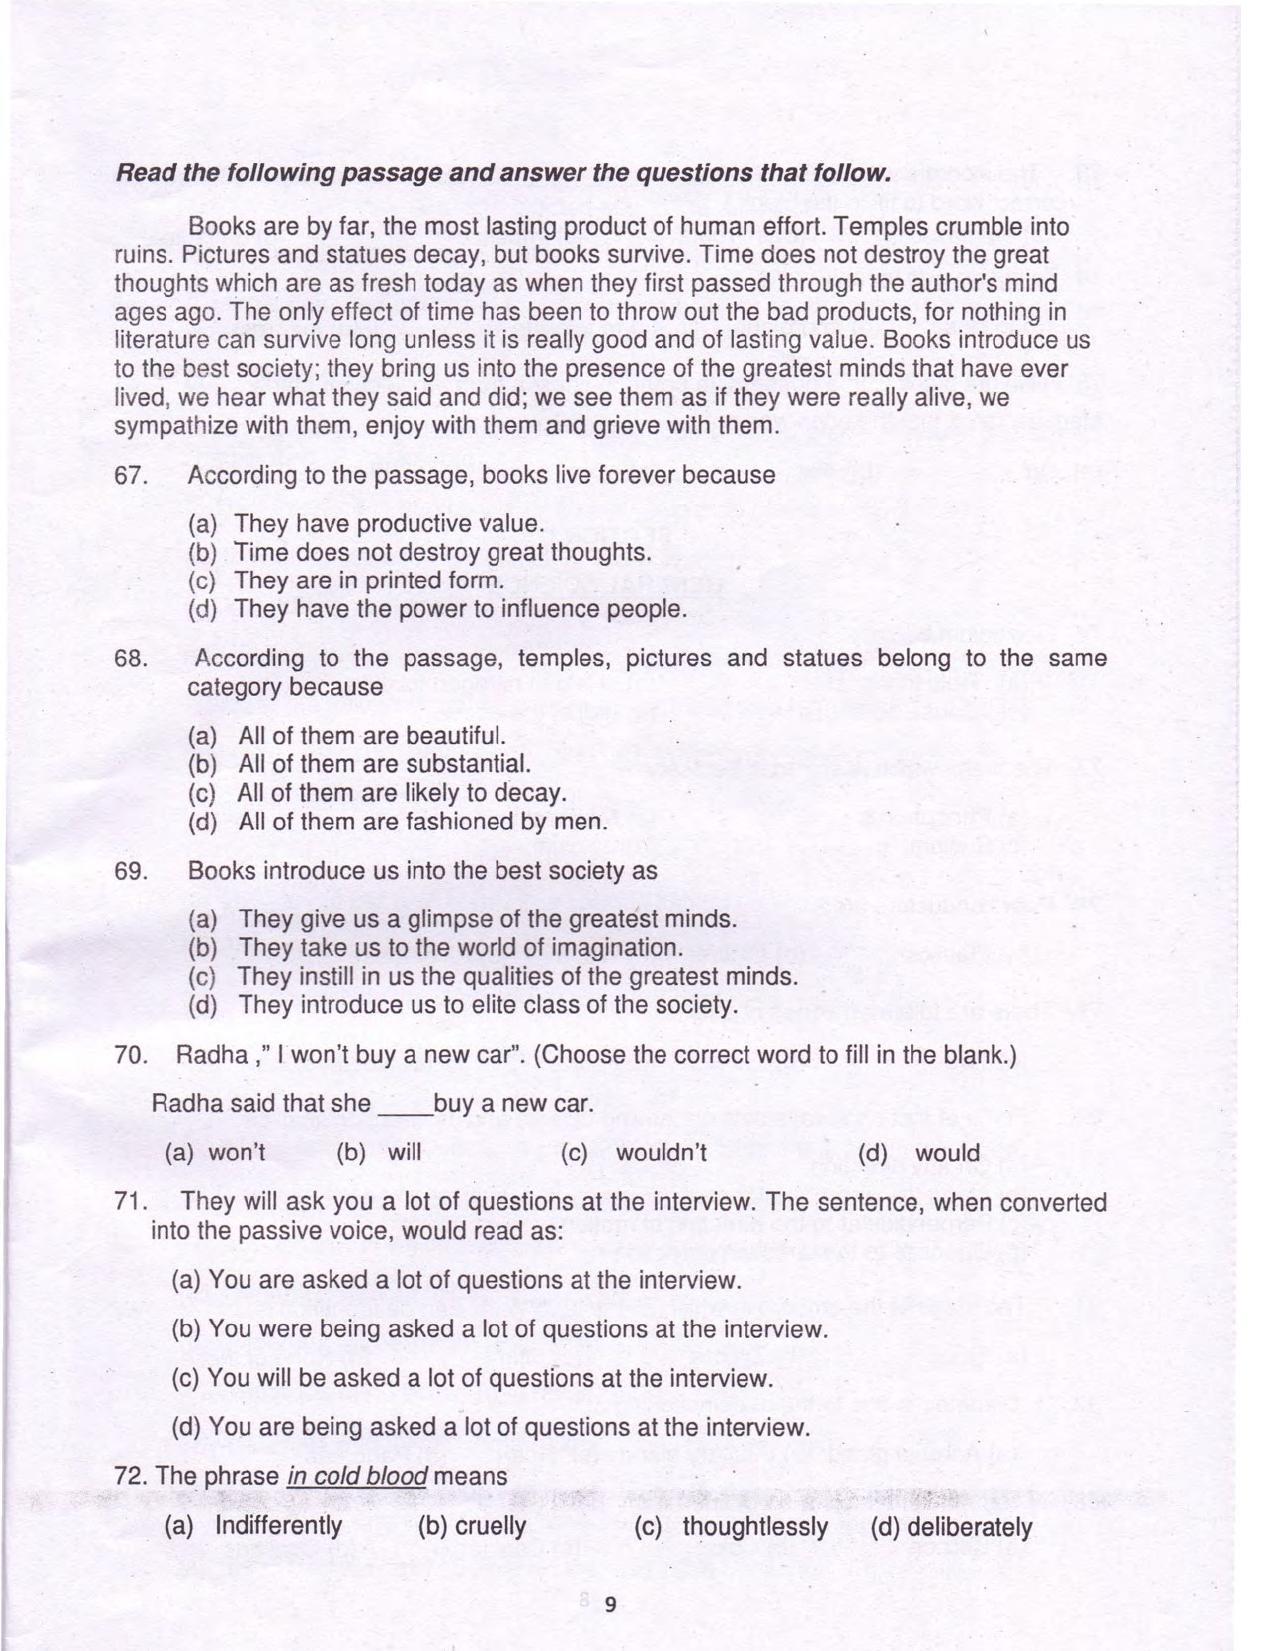 AISSEE Class 9 Sample Question Paper - Page 9